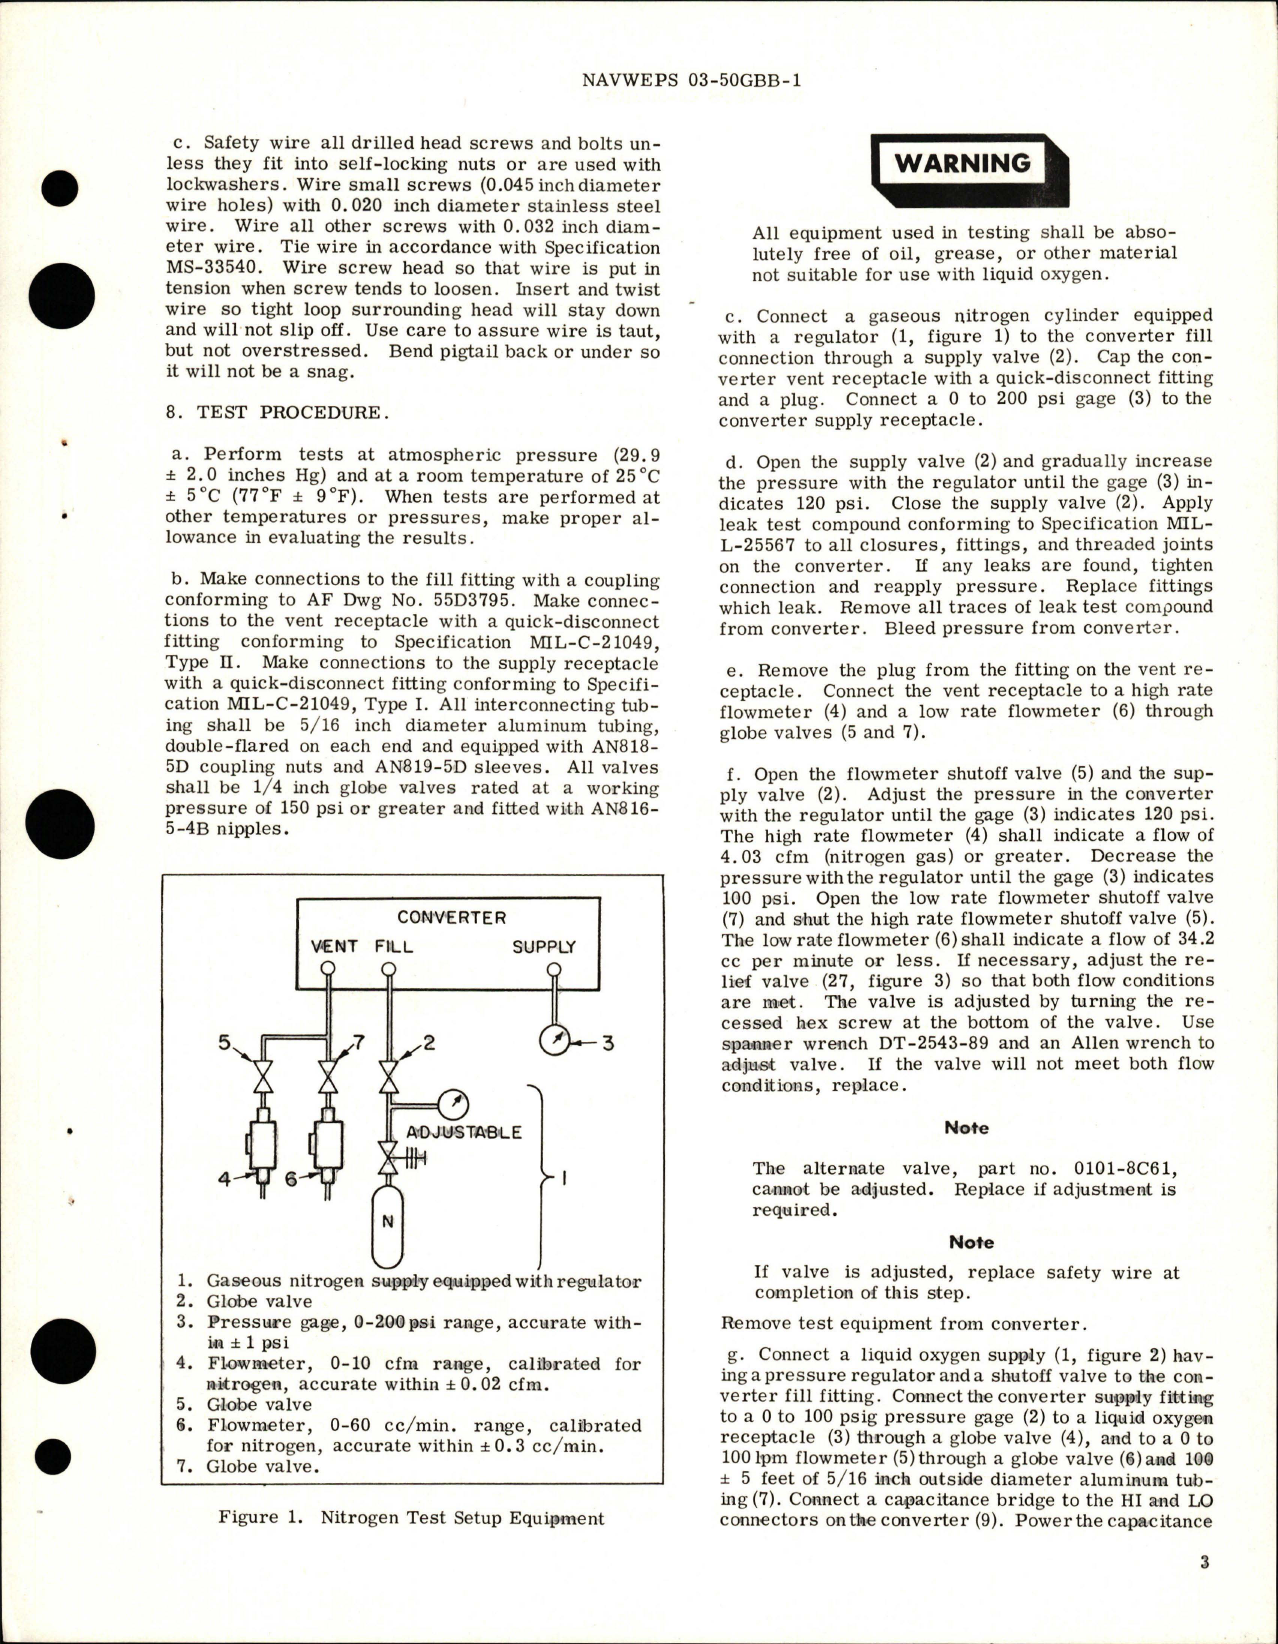 Sample page 5 from AirCorps Library document: Overhaul Instructions with Illustrated Parts Breakdown for 10 Liter Liquid Oxygen Converter - Part 0101-0C08 